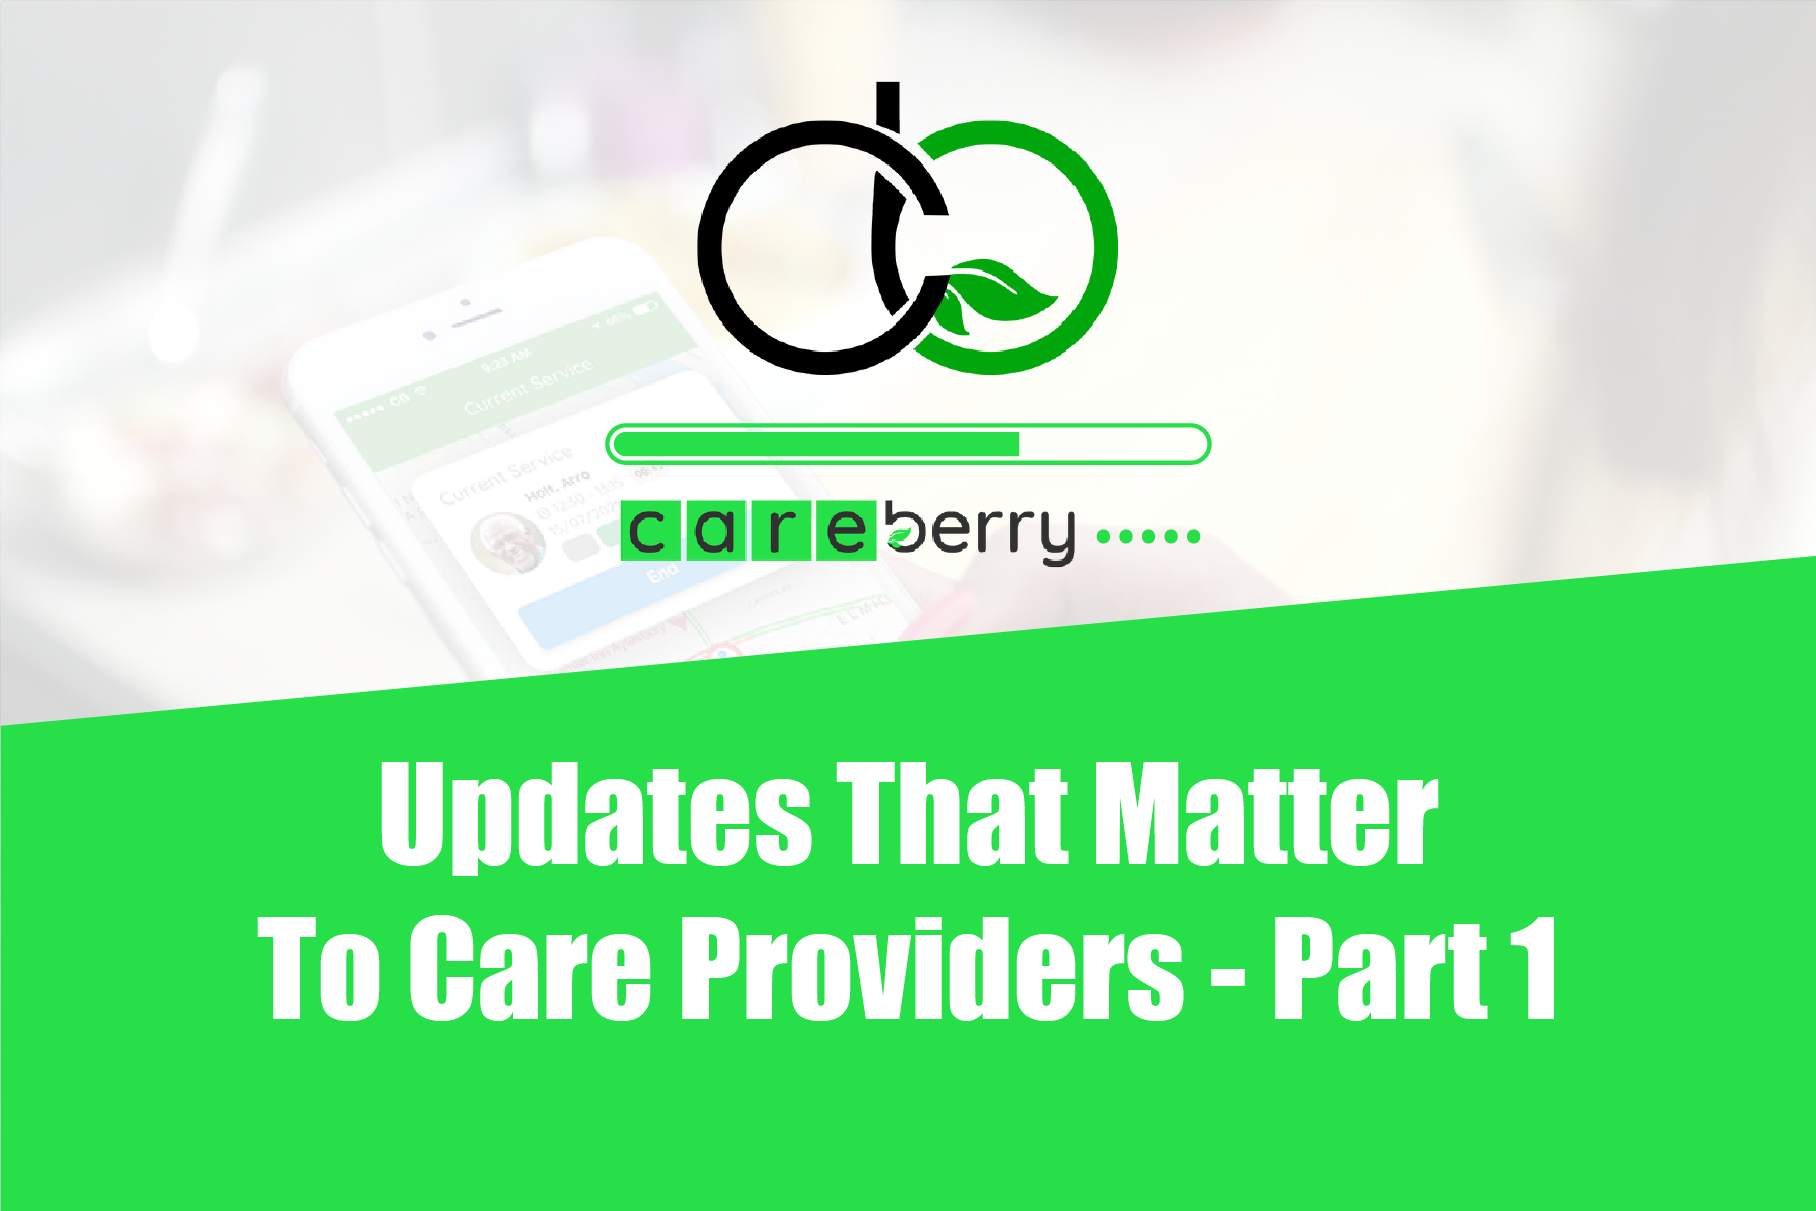 Updates That Matter to Care Providers